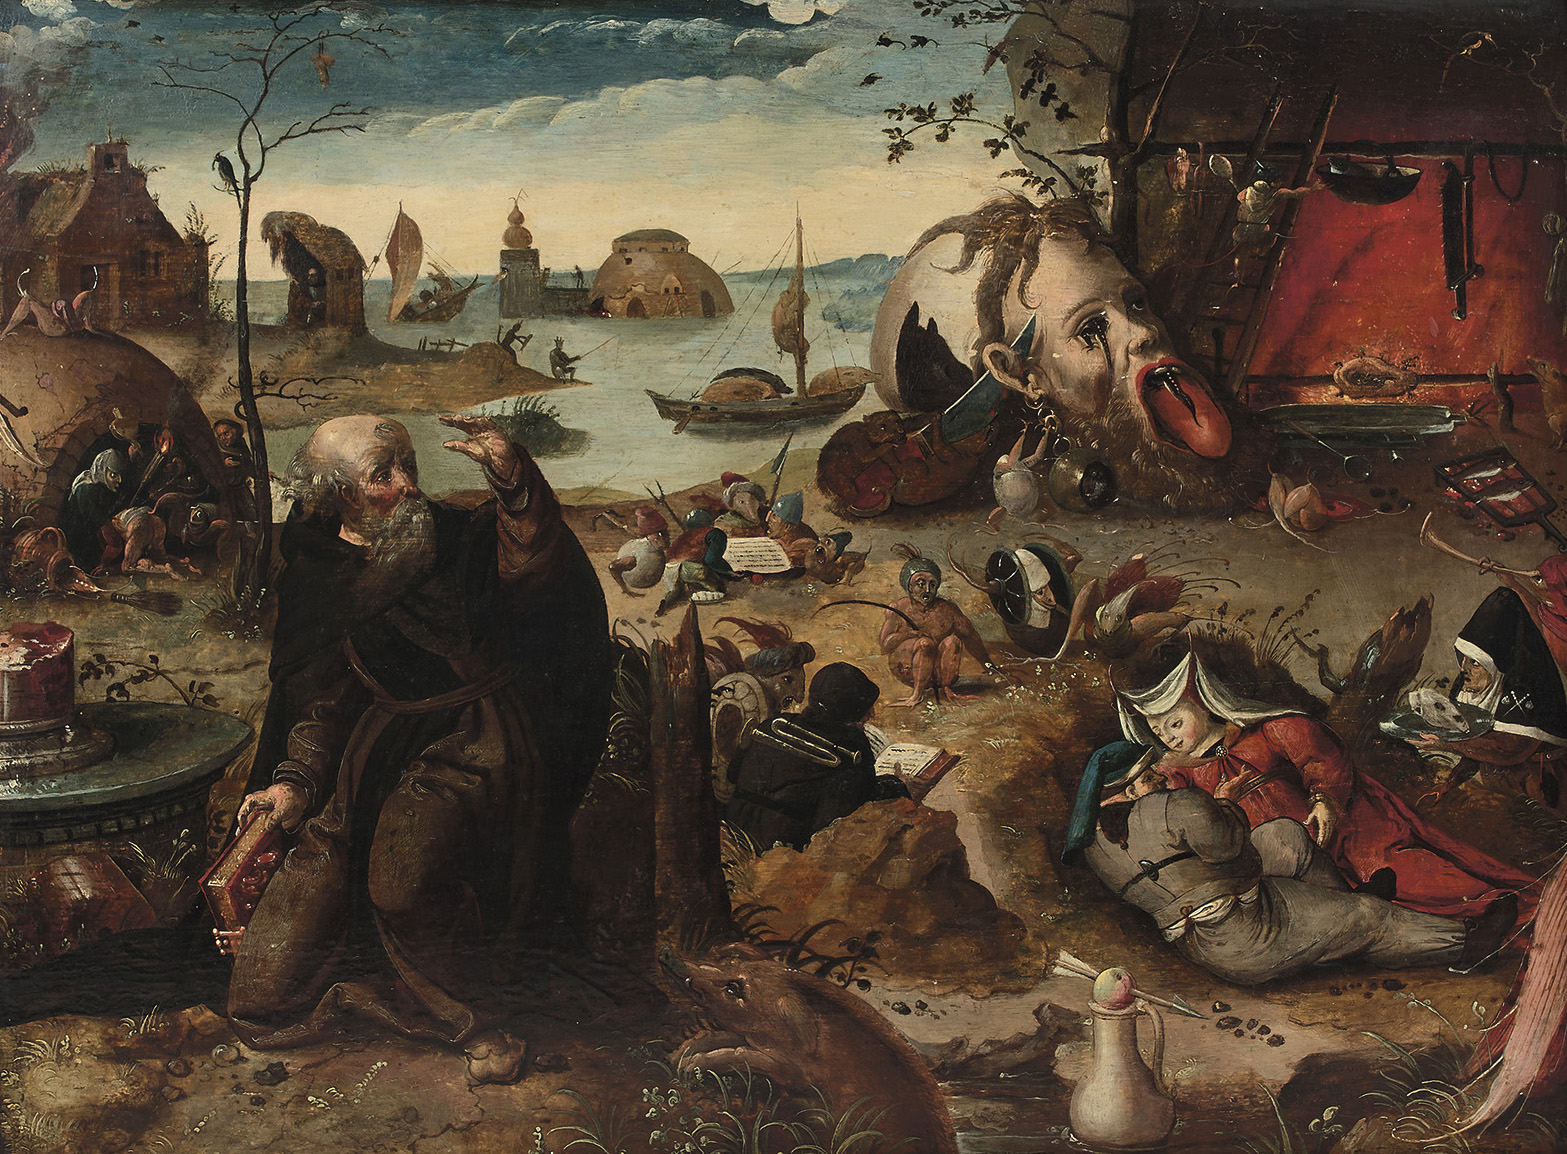 The most noteworthy old master painting was The Temptation of Saint Anthony (41.8 x 57.8 cm/16.46 x 22.75 in), an undated panel attributed